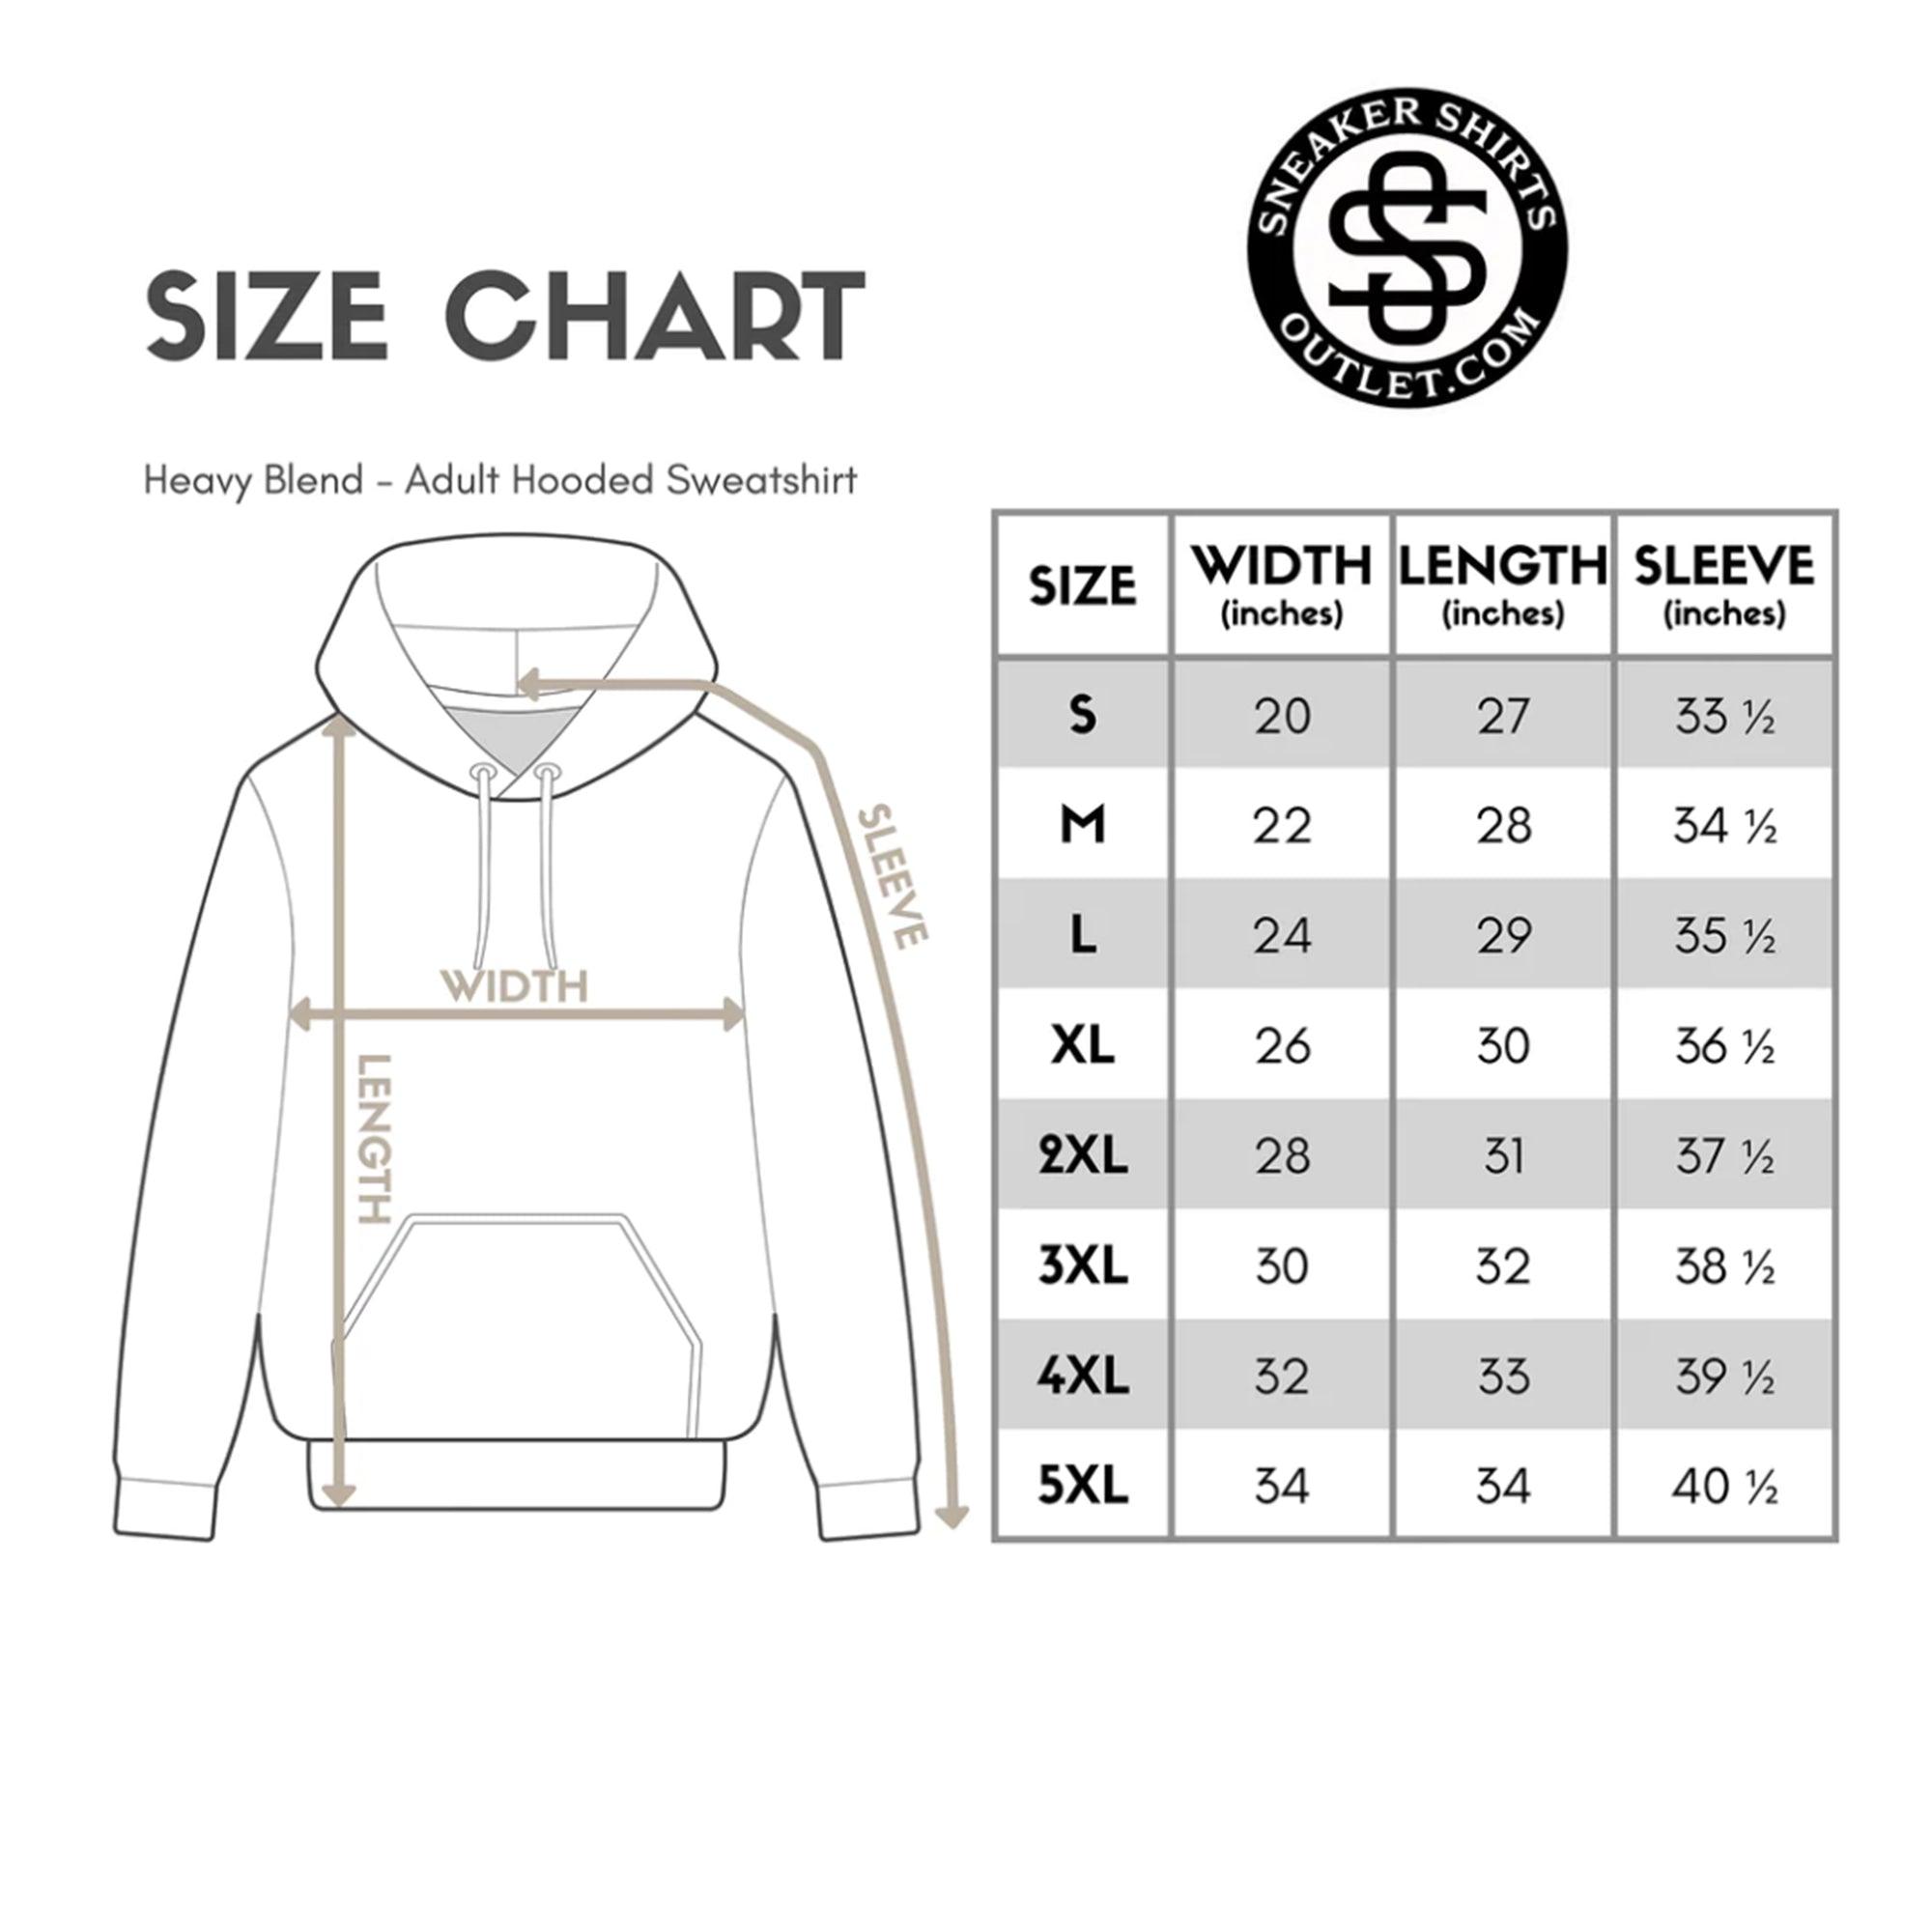 size chart for Stay True Hoodie Jordan 14 Low Shocking Pink photo